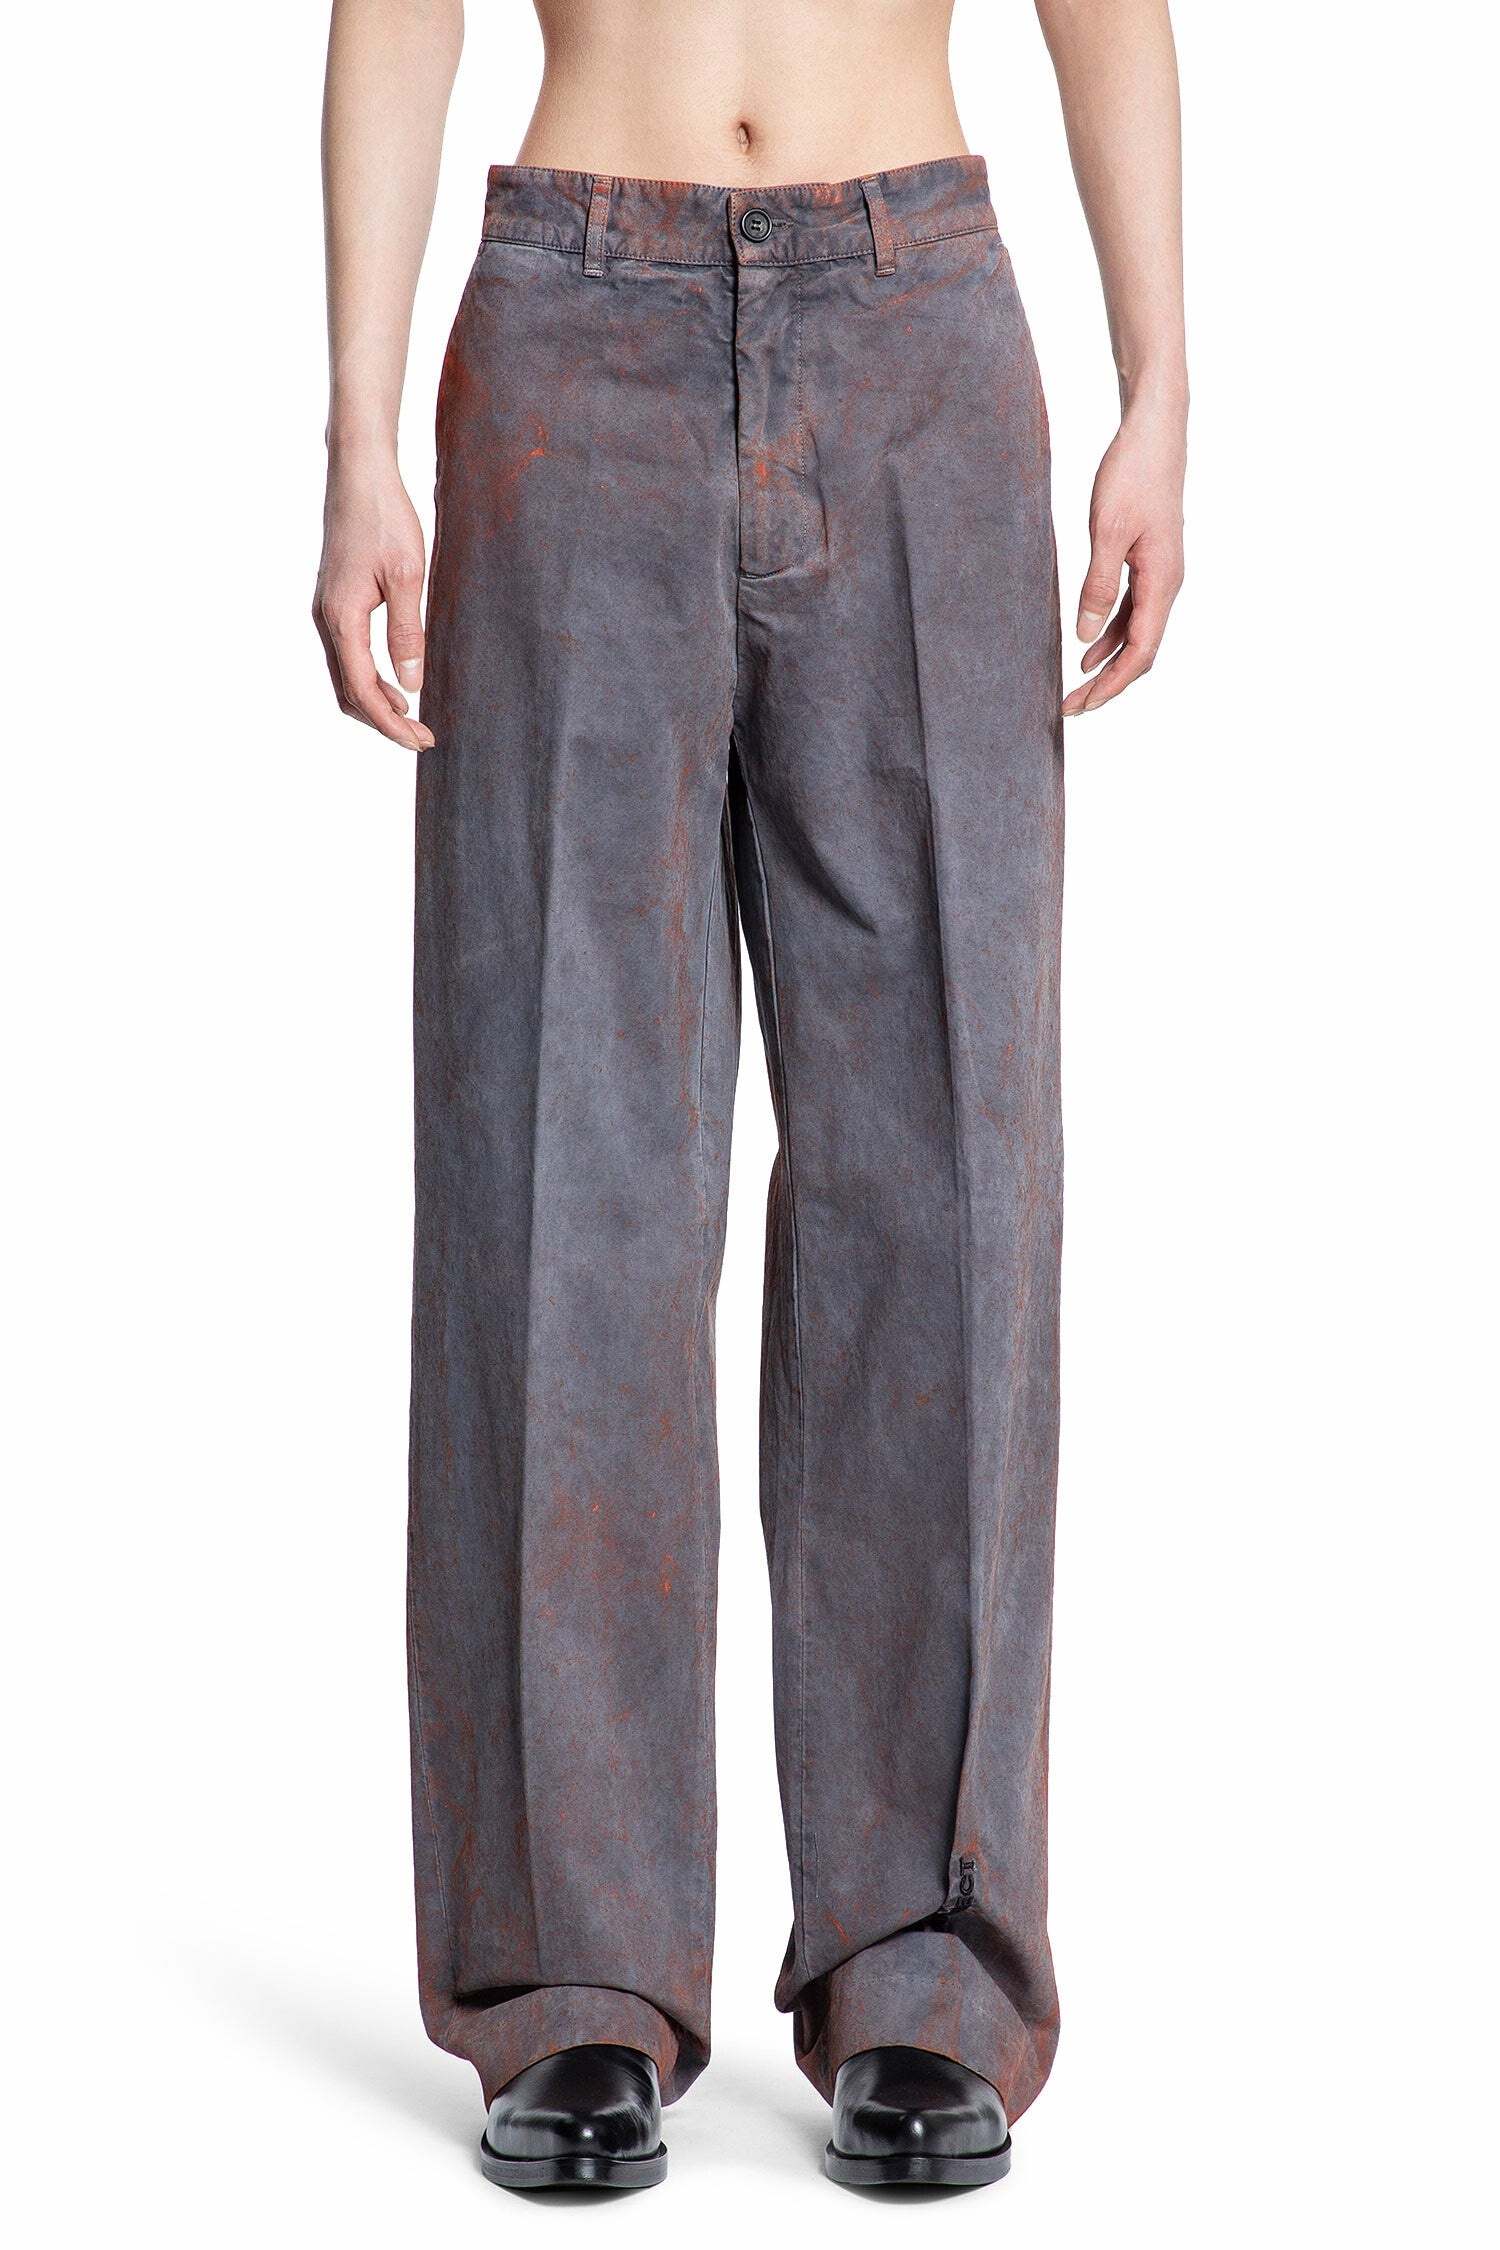 Y/PROJECT MAN GREY TROUSERS - 1